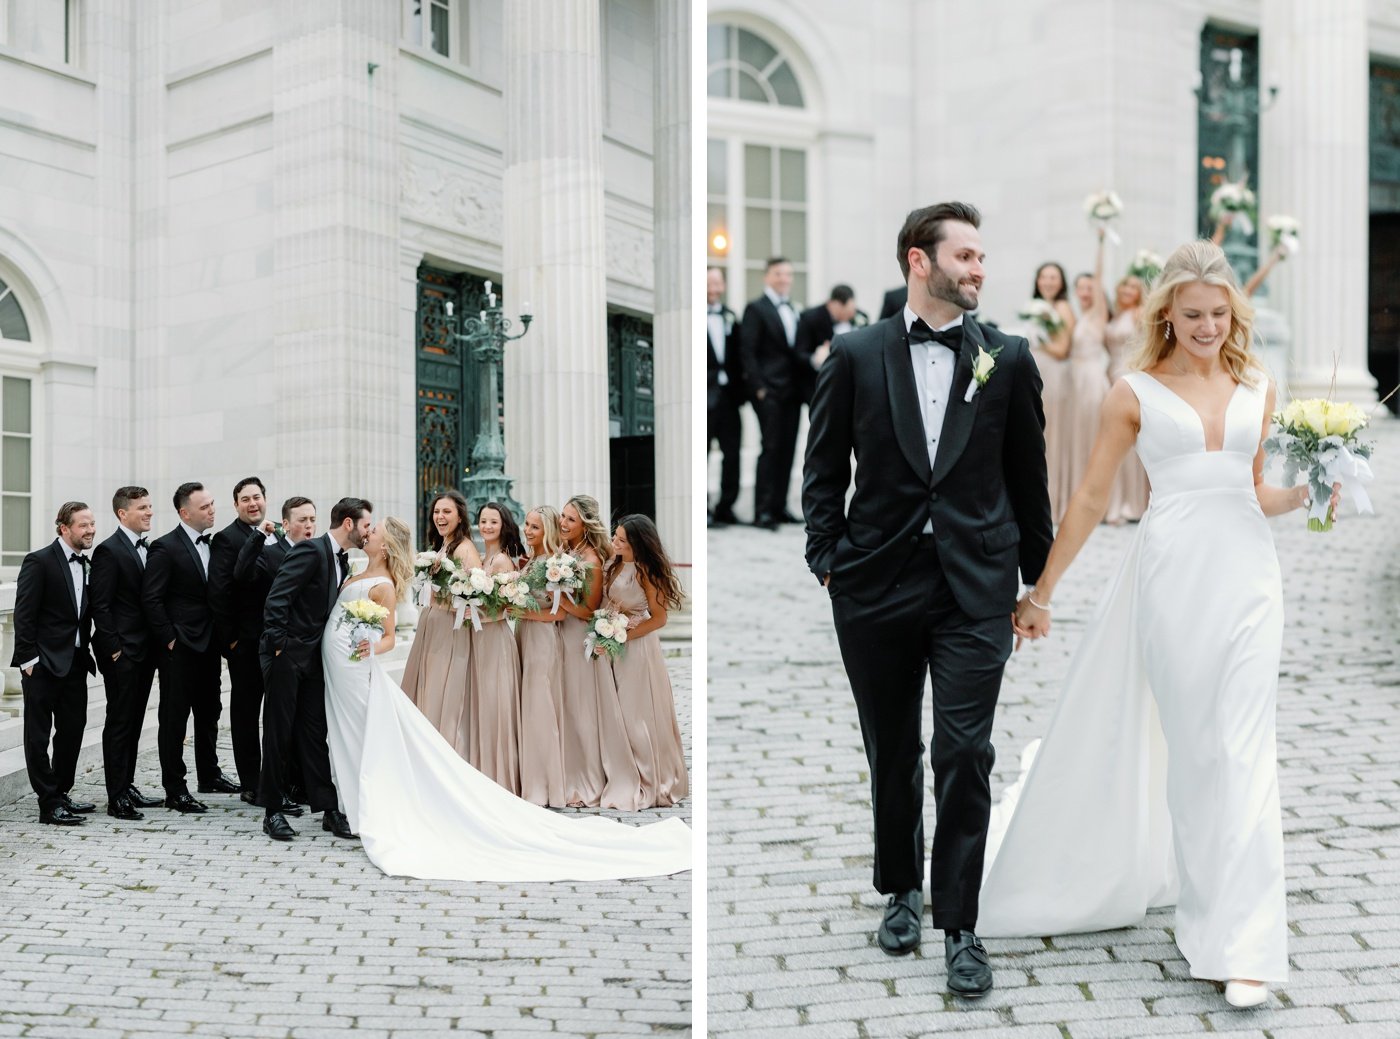 Bridal party portraits at Rosecliff Mansion